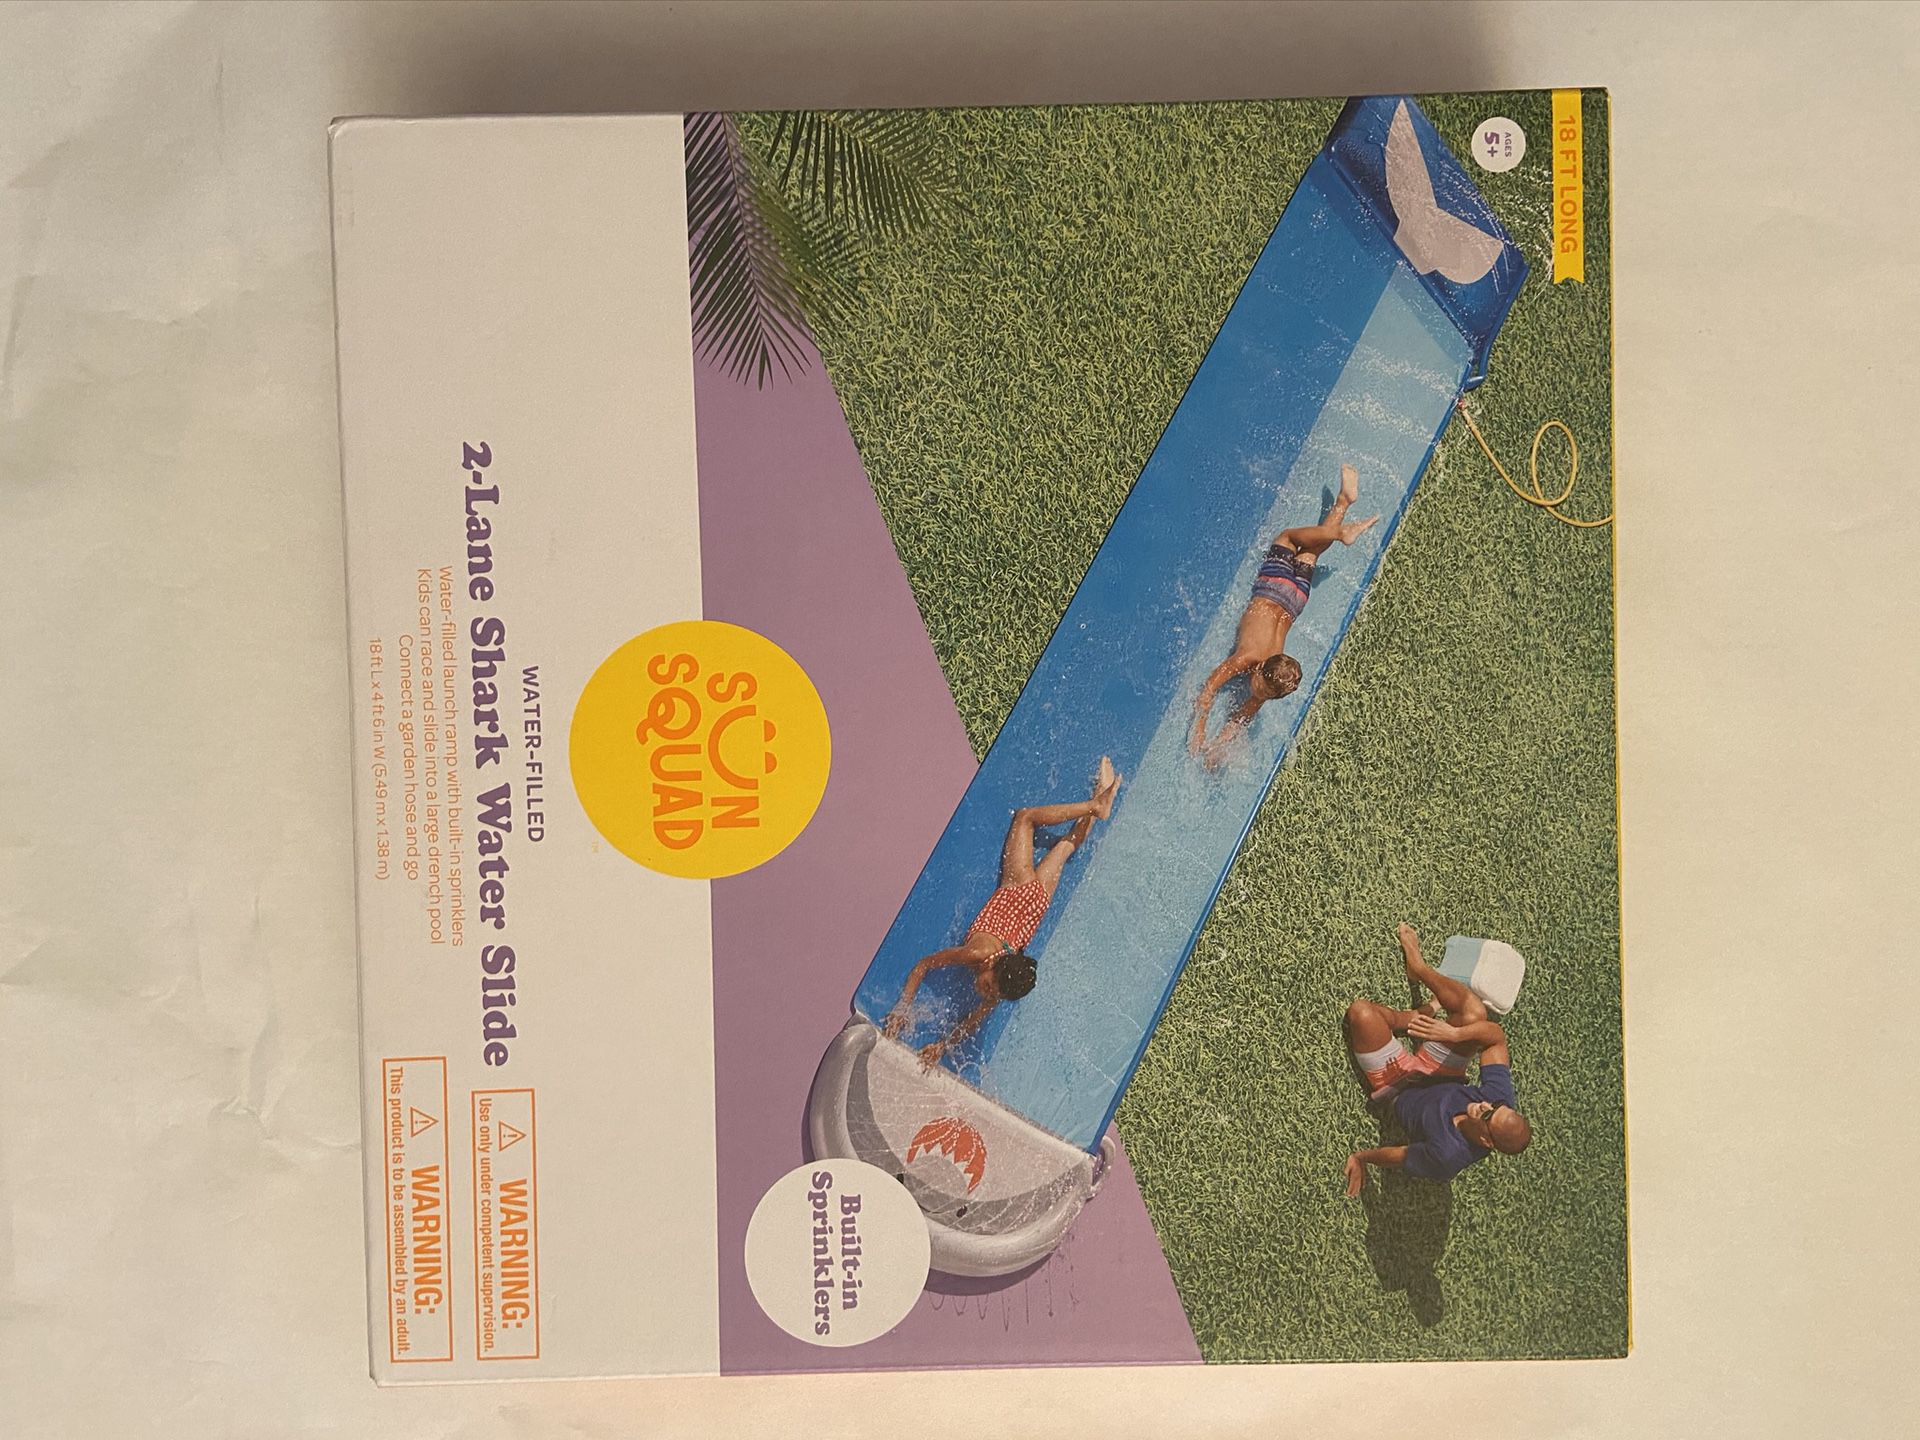 2 Lane Shark Slip and slide with EXTRA FEATURES